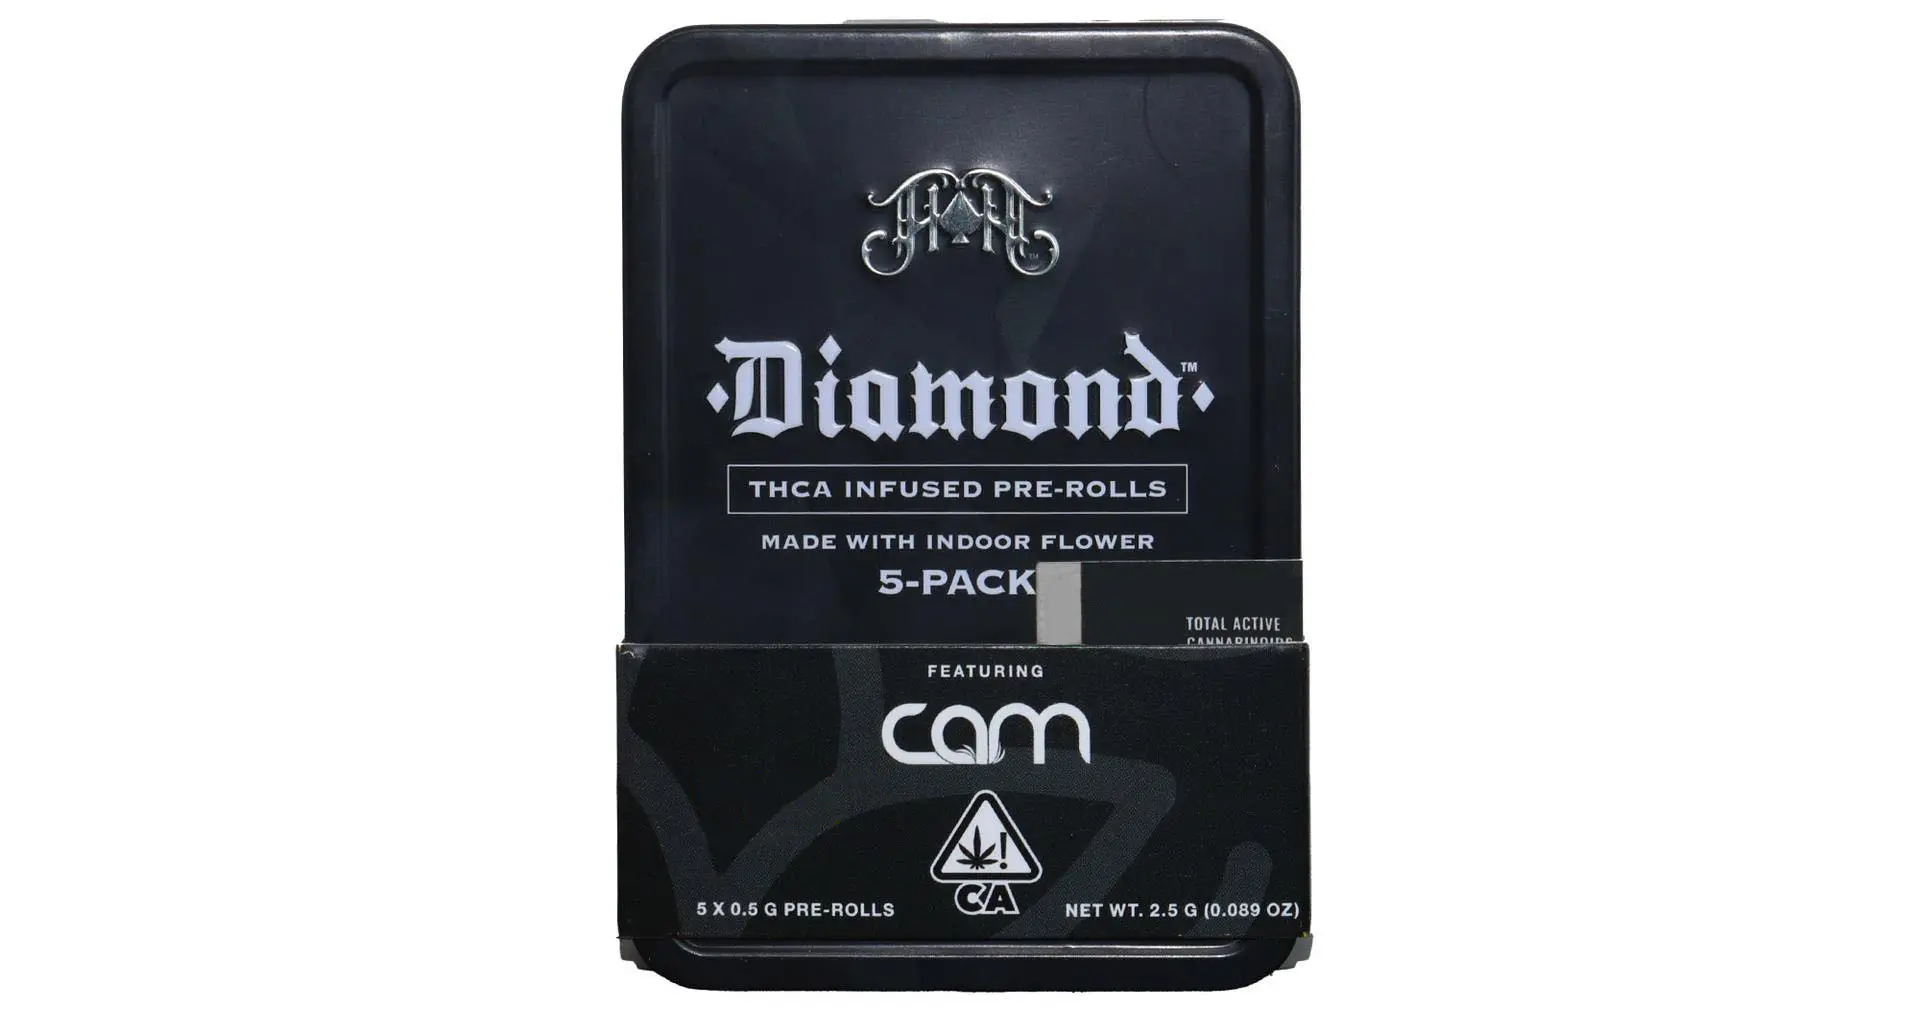 The Don Diamond Infused Pre-Rolls